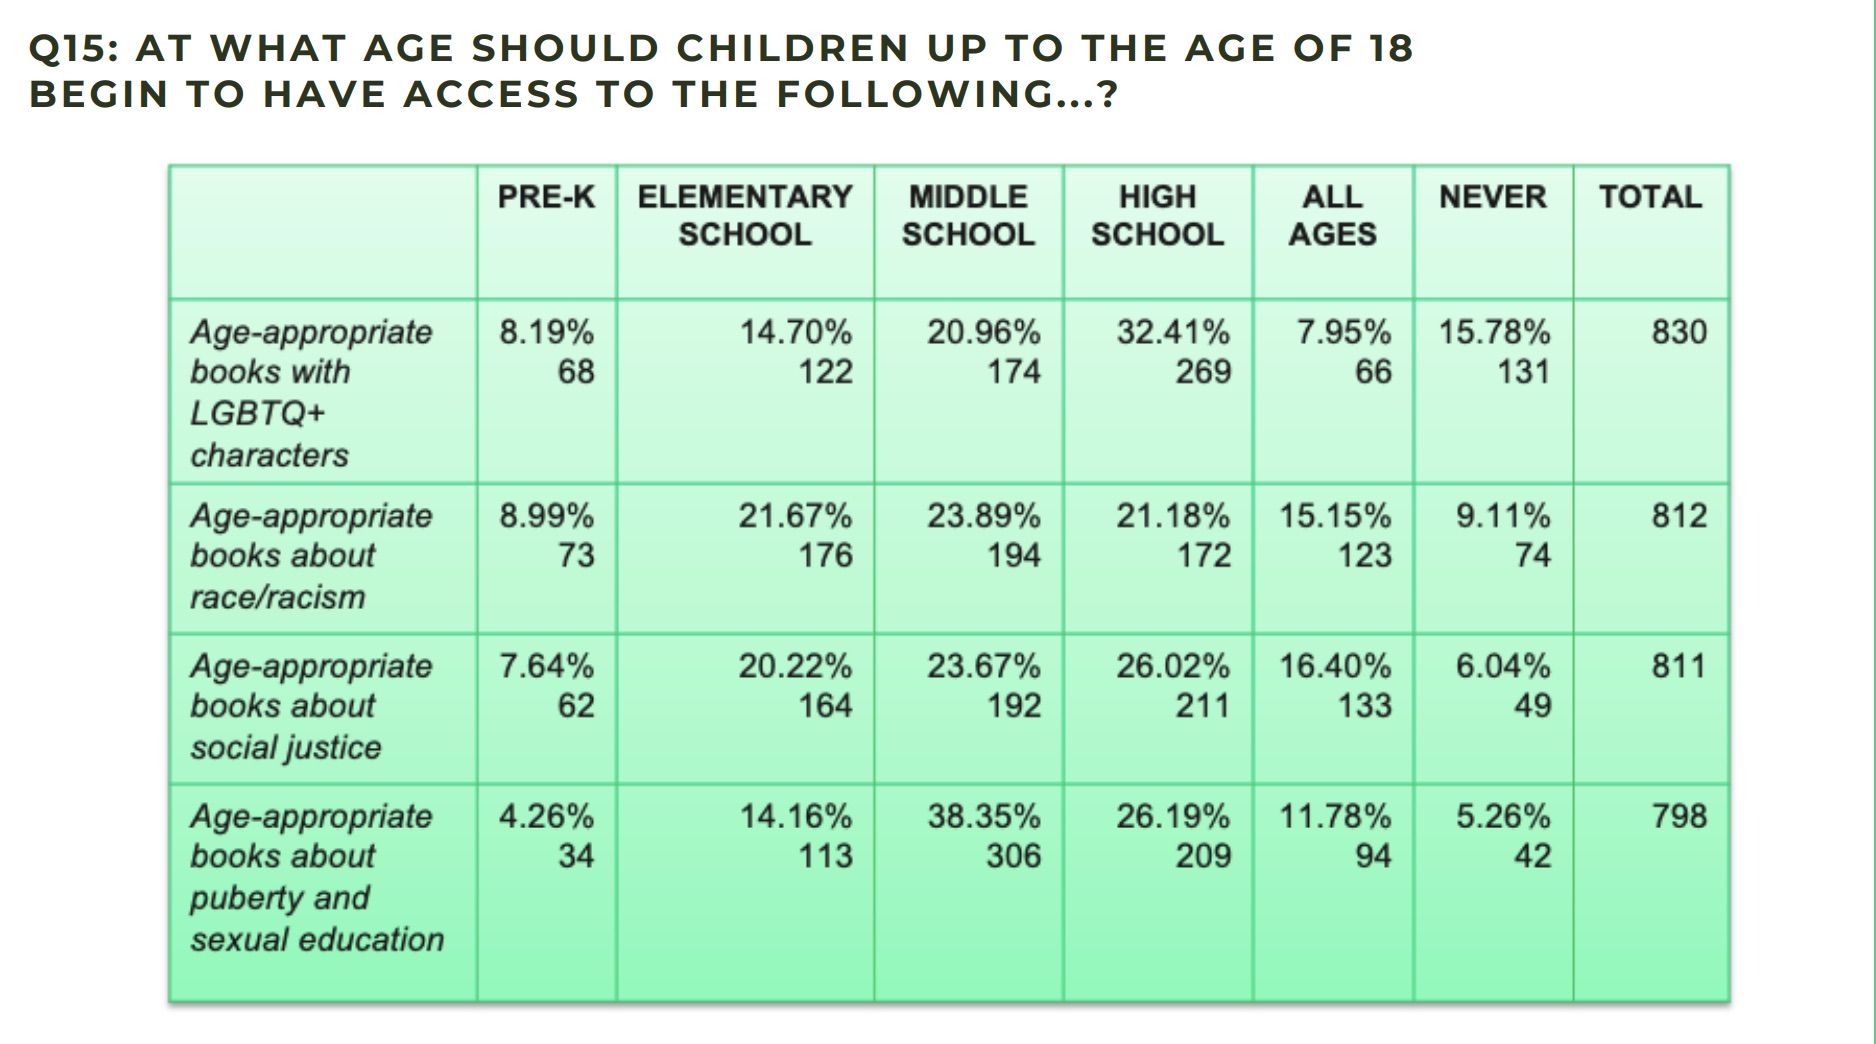 survey results chart of when parents believe children and teens should have access to books on several topics. 